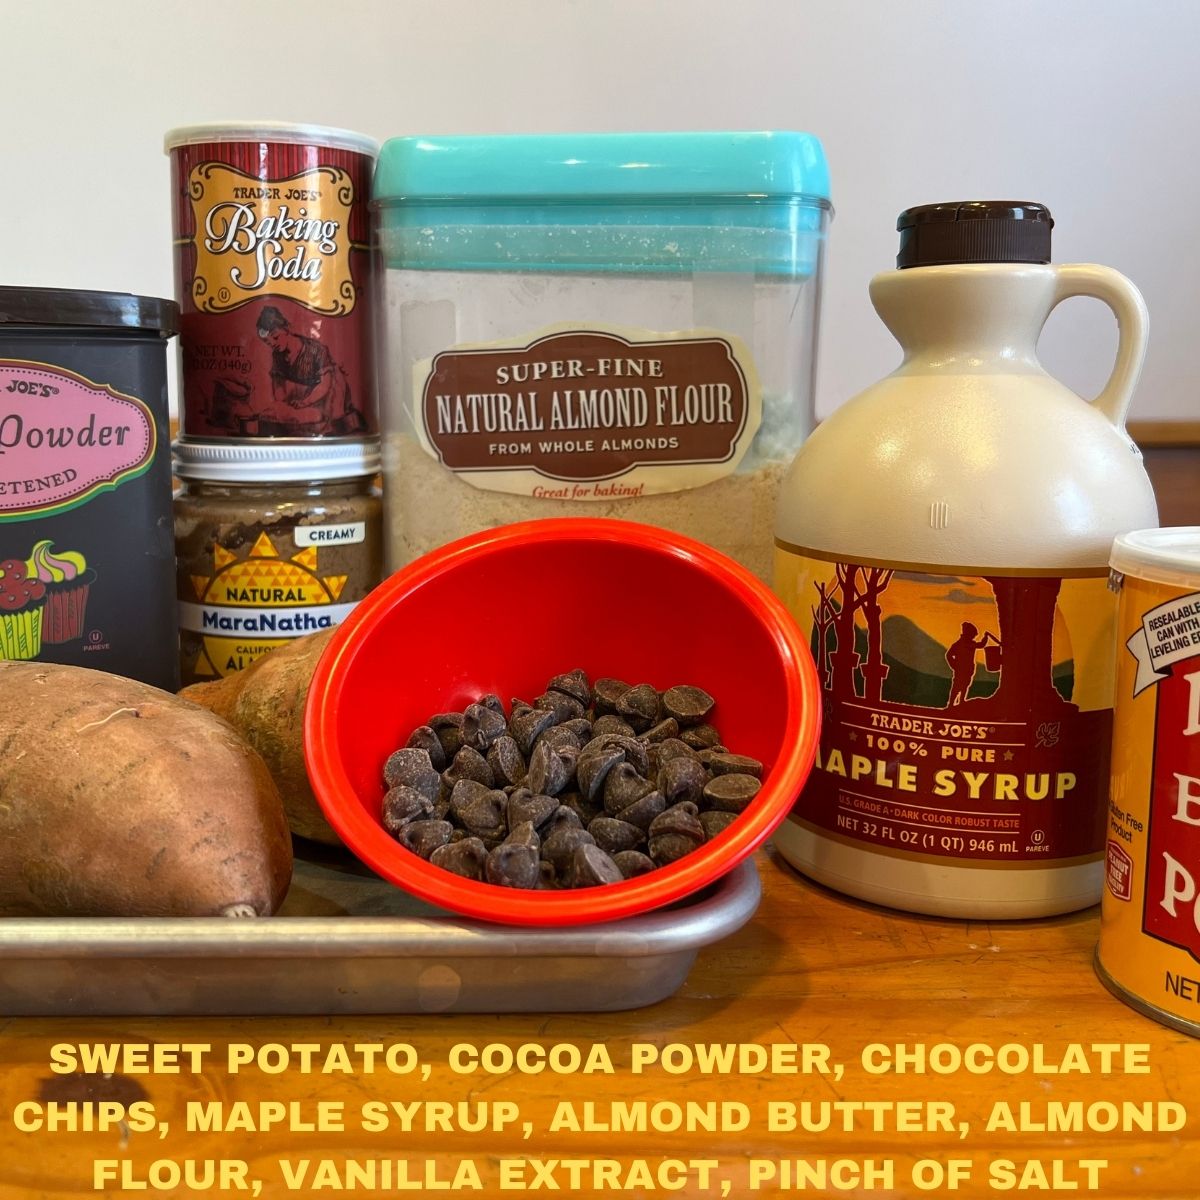 Triple chocolate brownie ingredients on a wooden table - cocoa powder, almond flour, almond butter, sweet potatoes, chocolate chips in a red bowl and maple syrup